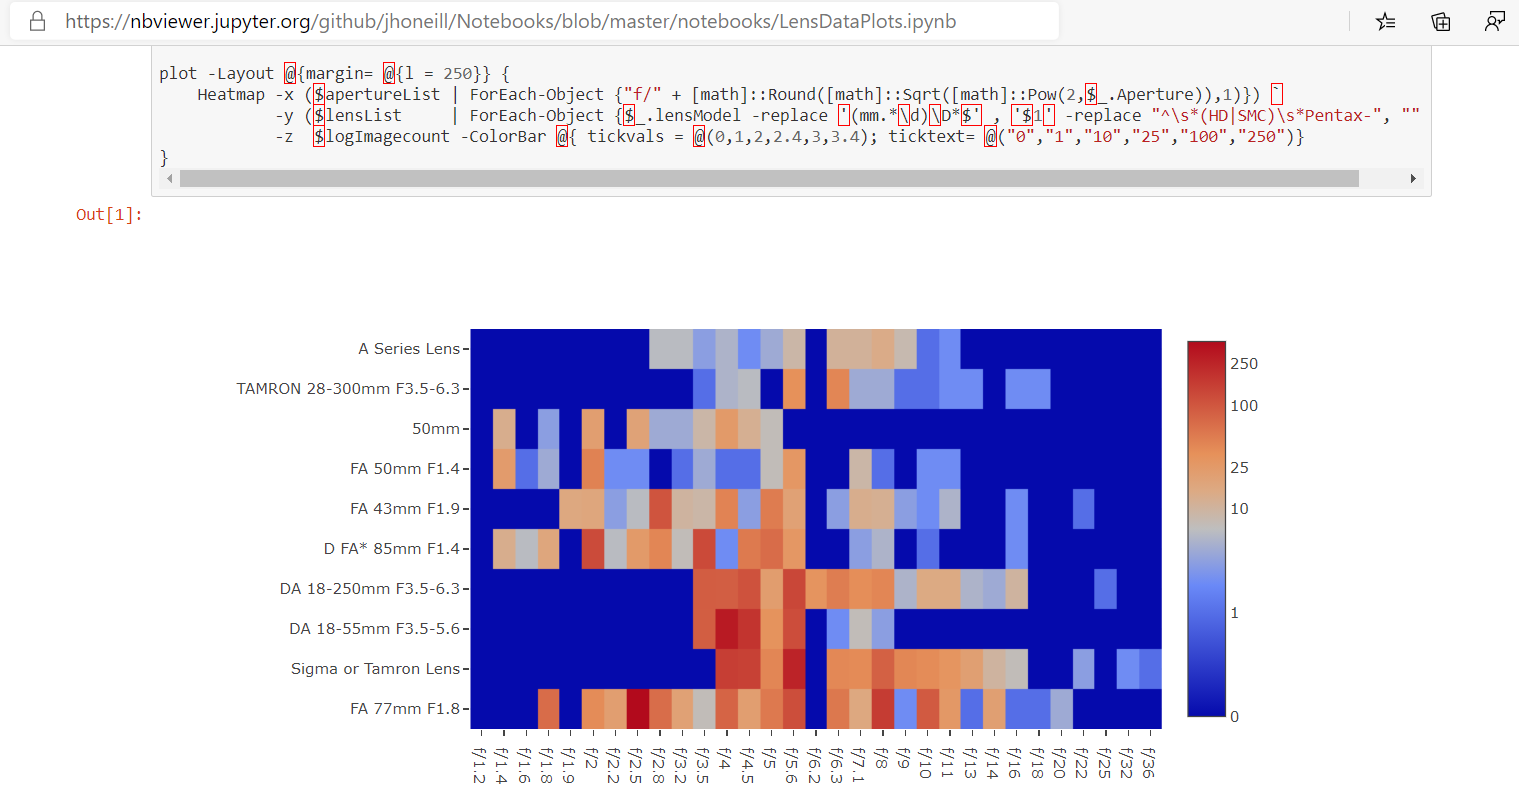 nbViewer showing a plotly chart